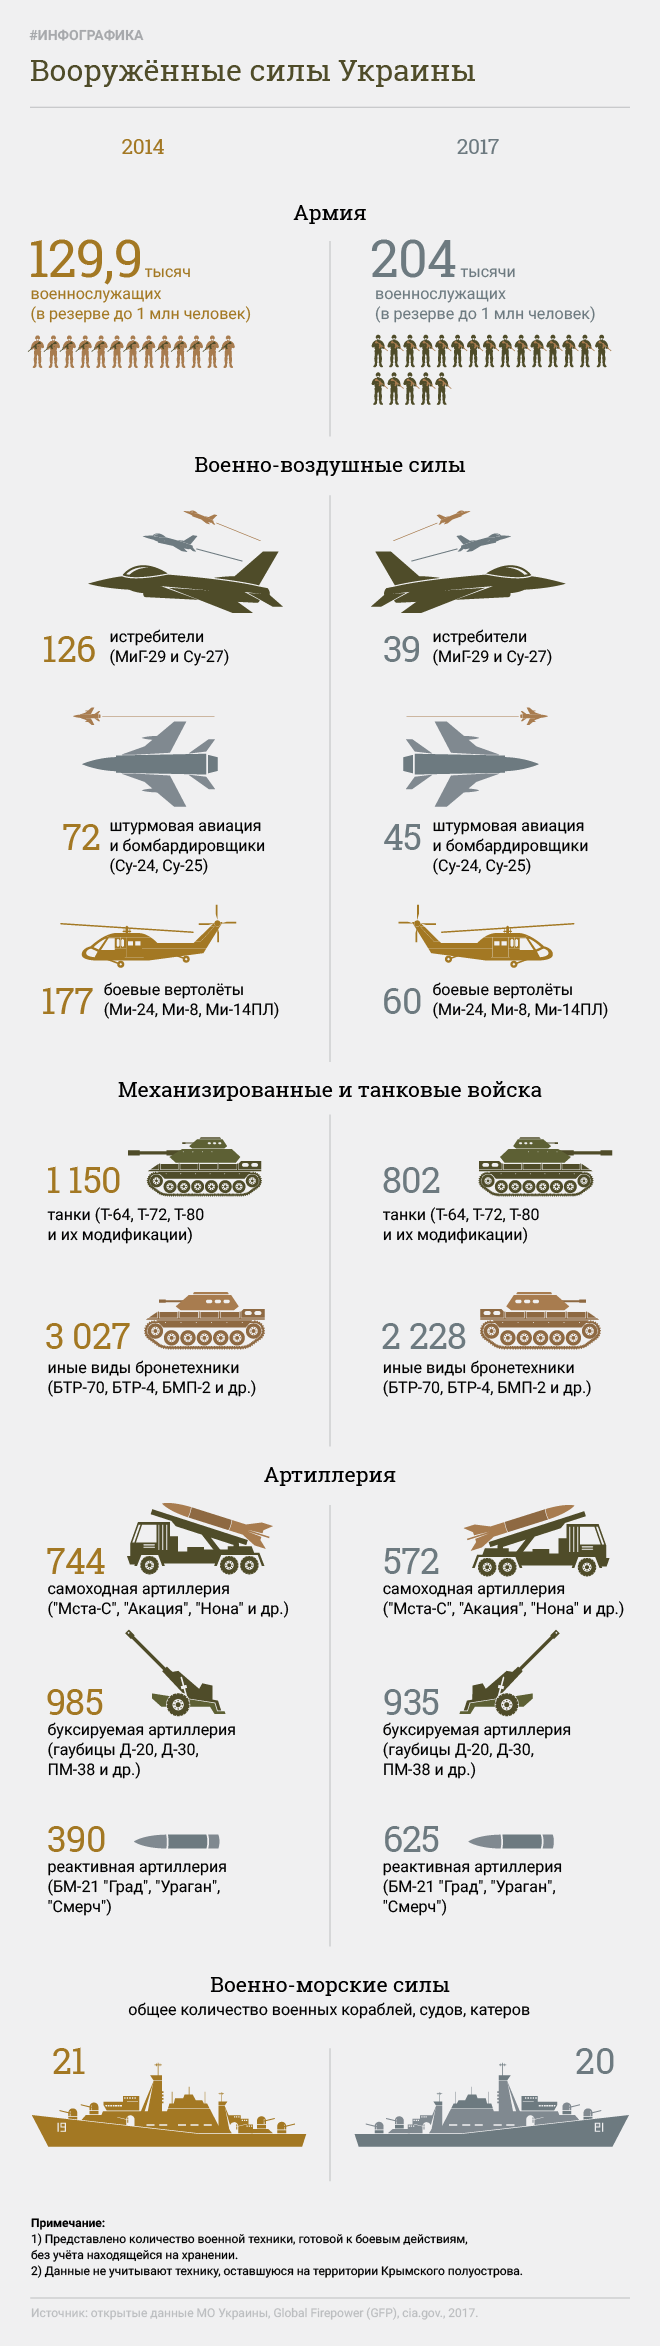 Armed forces of Ukraine. Infographics